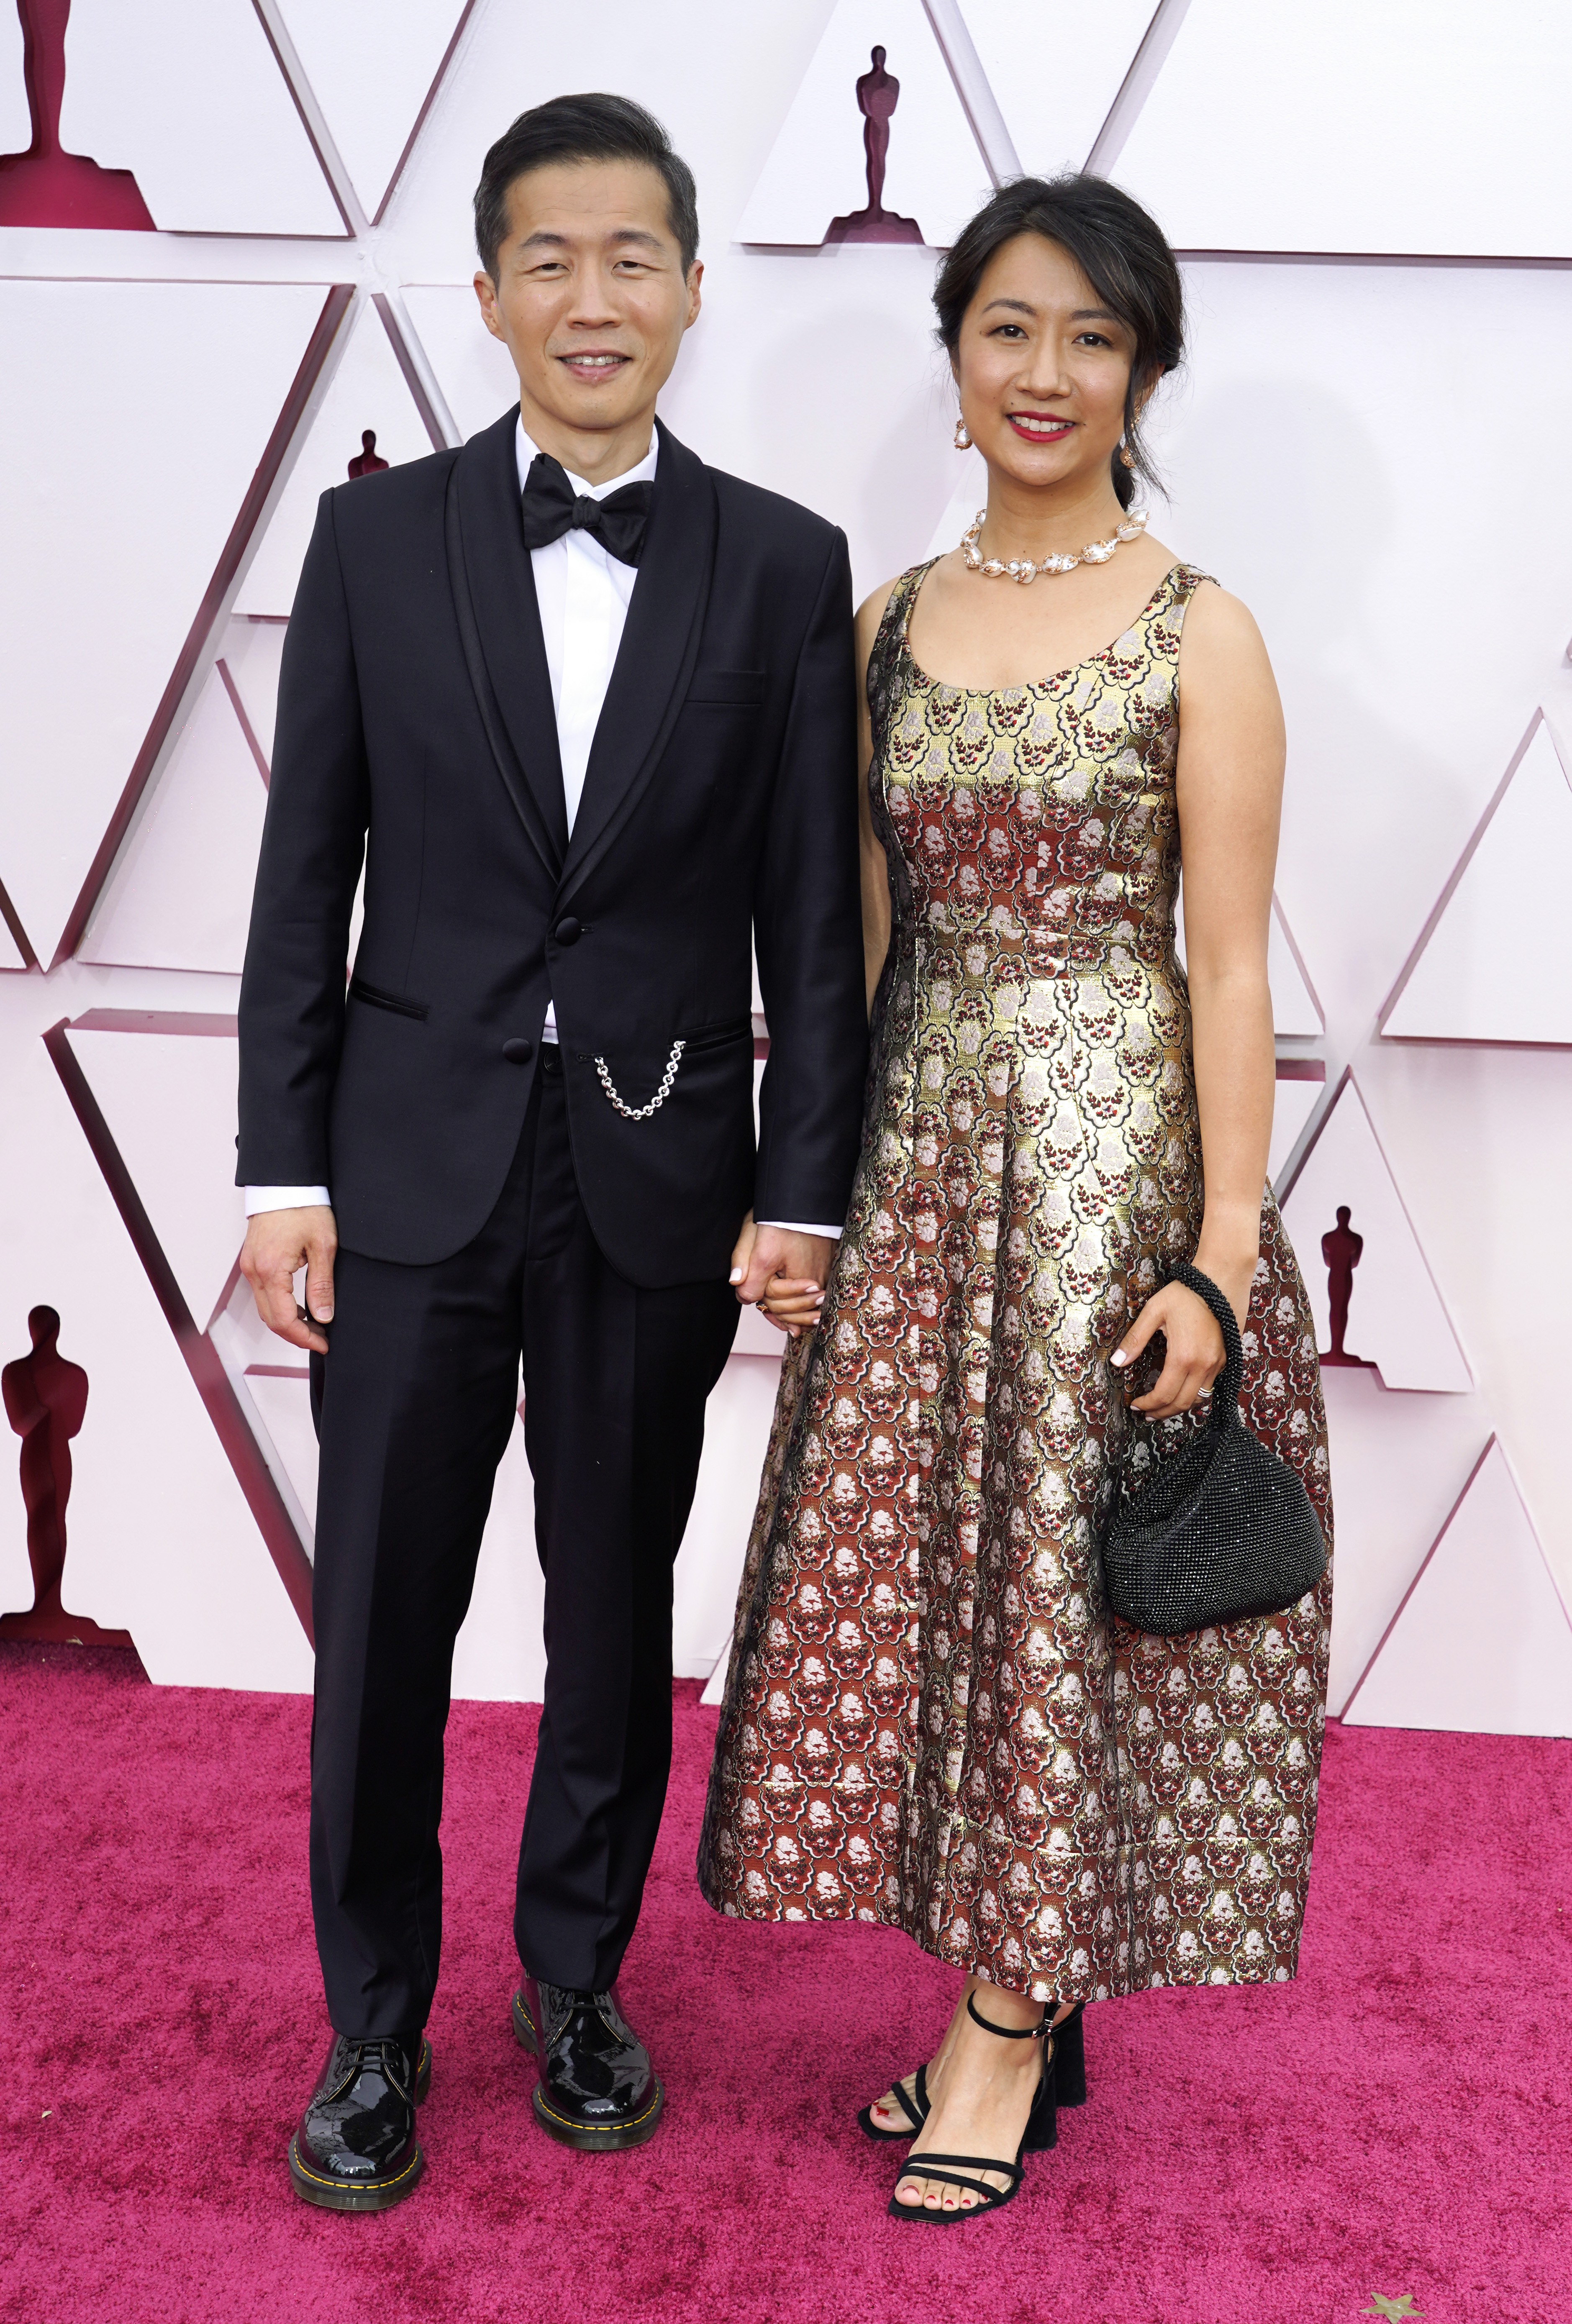 Lee Isaac Chung e Valerie Chung (Foto: Getty Images)